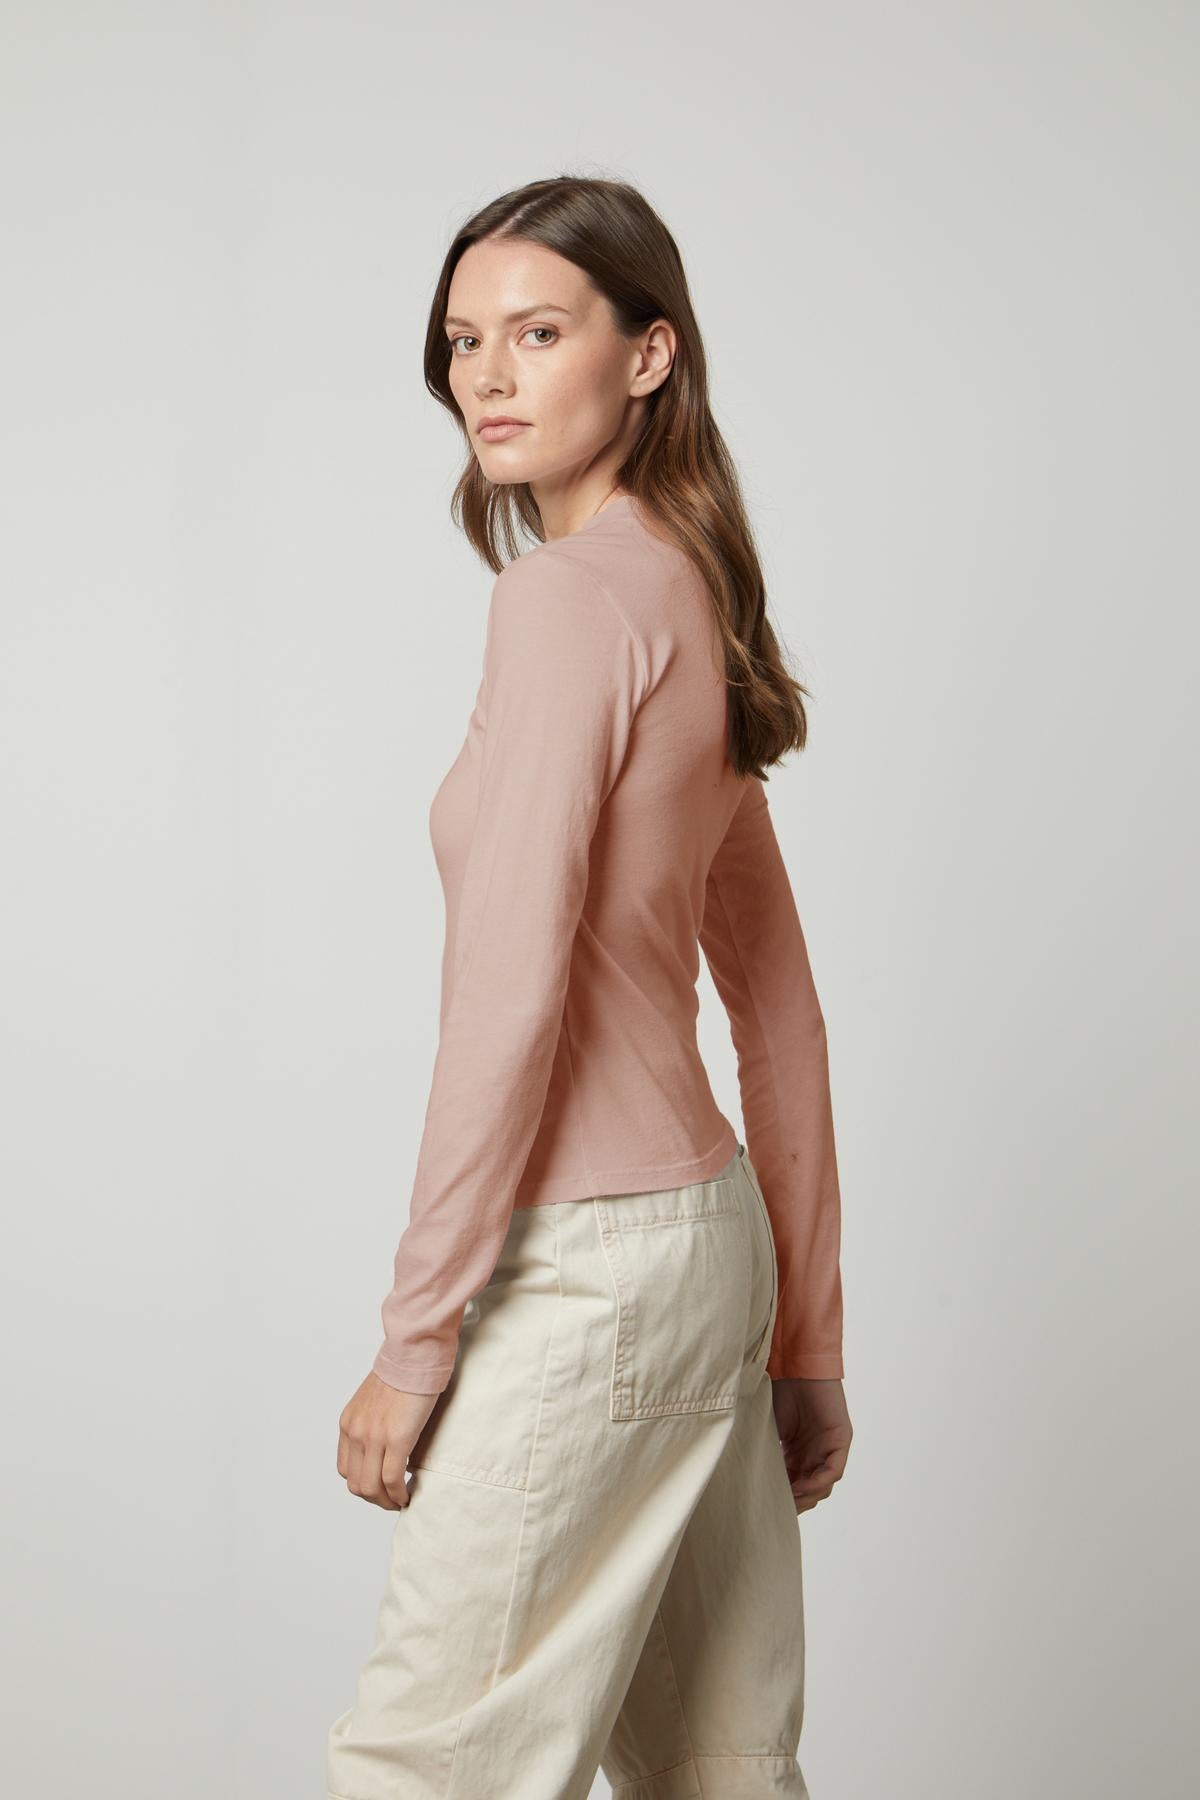   The model is wearing a LINNY MOCK NECK TEE by Velvet by Graham & Spencer, creating a flattering silhouette. 